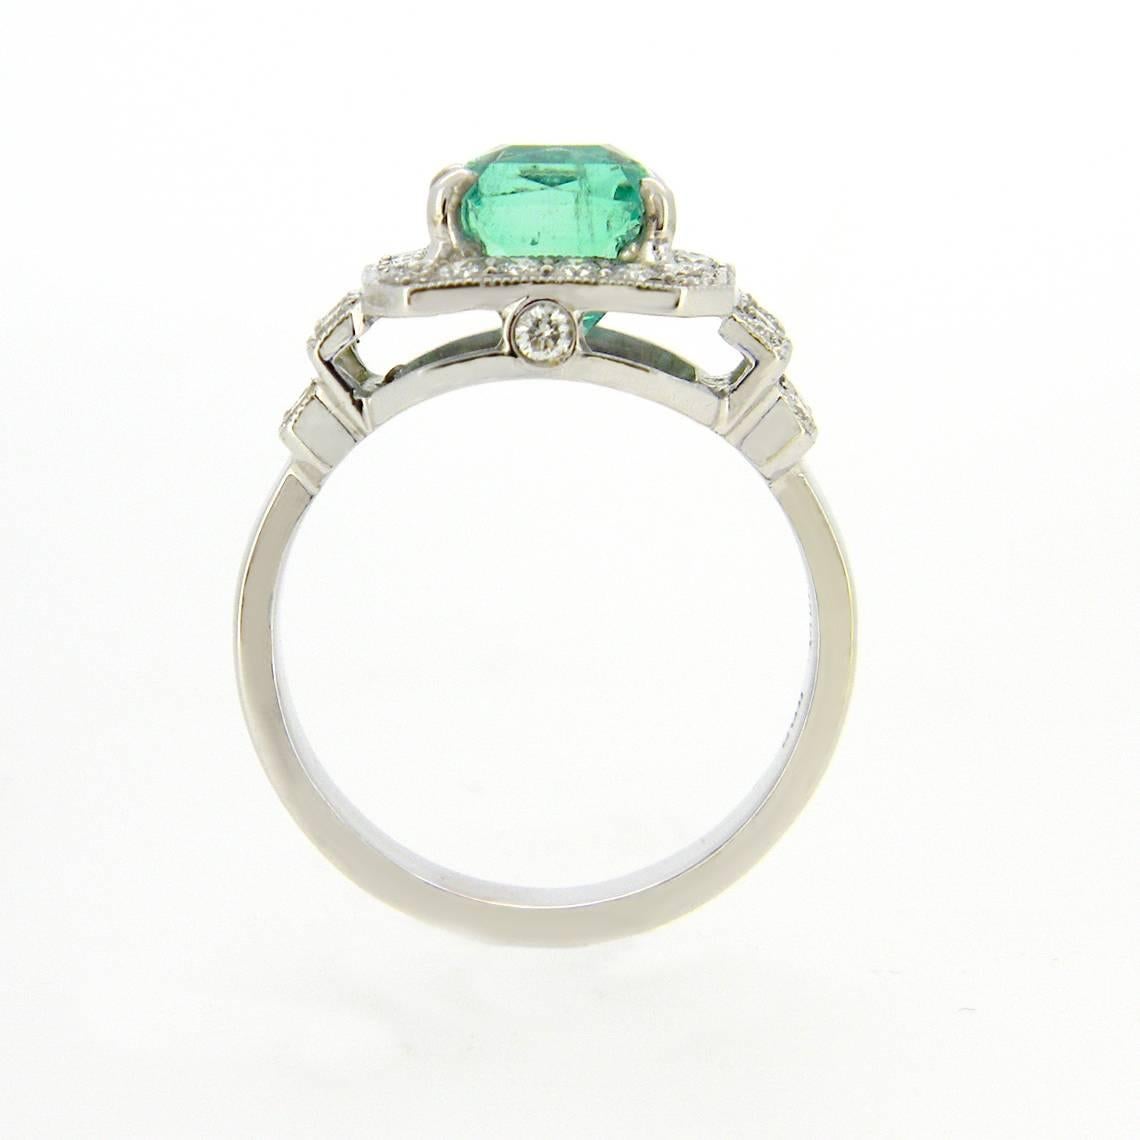 Handmade 18 karat white ring centred with a 3.07ct mixed emerald cut natural ( light bright green with fine inclusions slightly visible to naked eye) surrounded  by 0.68cts of brilliant cut diamonds G/H Si1
Designed and made in our Melbourne